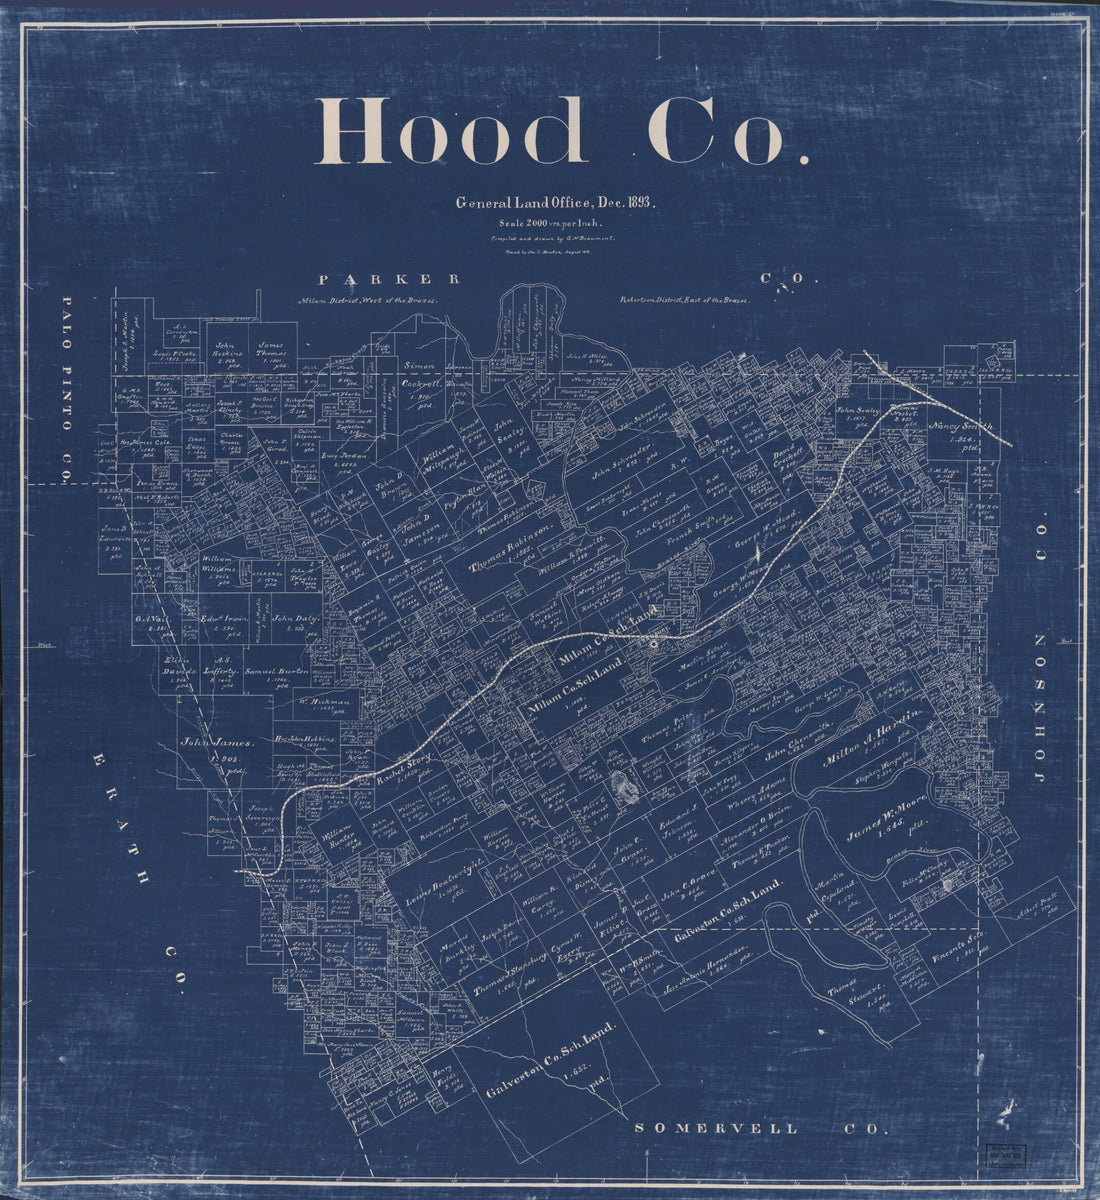 This old map of Hood Co., Texas (Hood County, Texas) from 1893 was created by G. N. Beaumont,  Texas. General Land Office in 1893